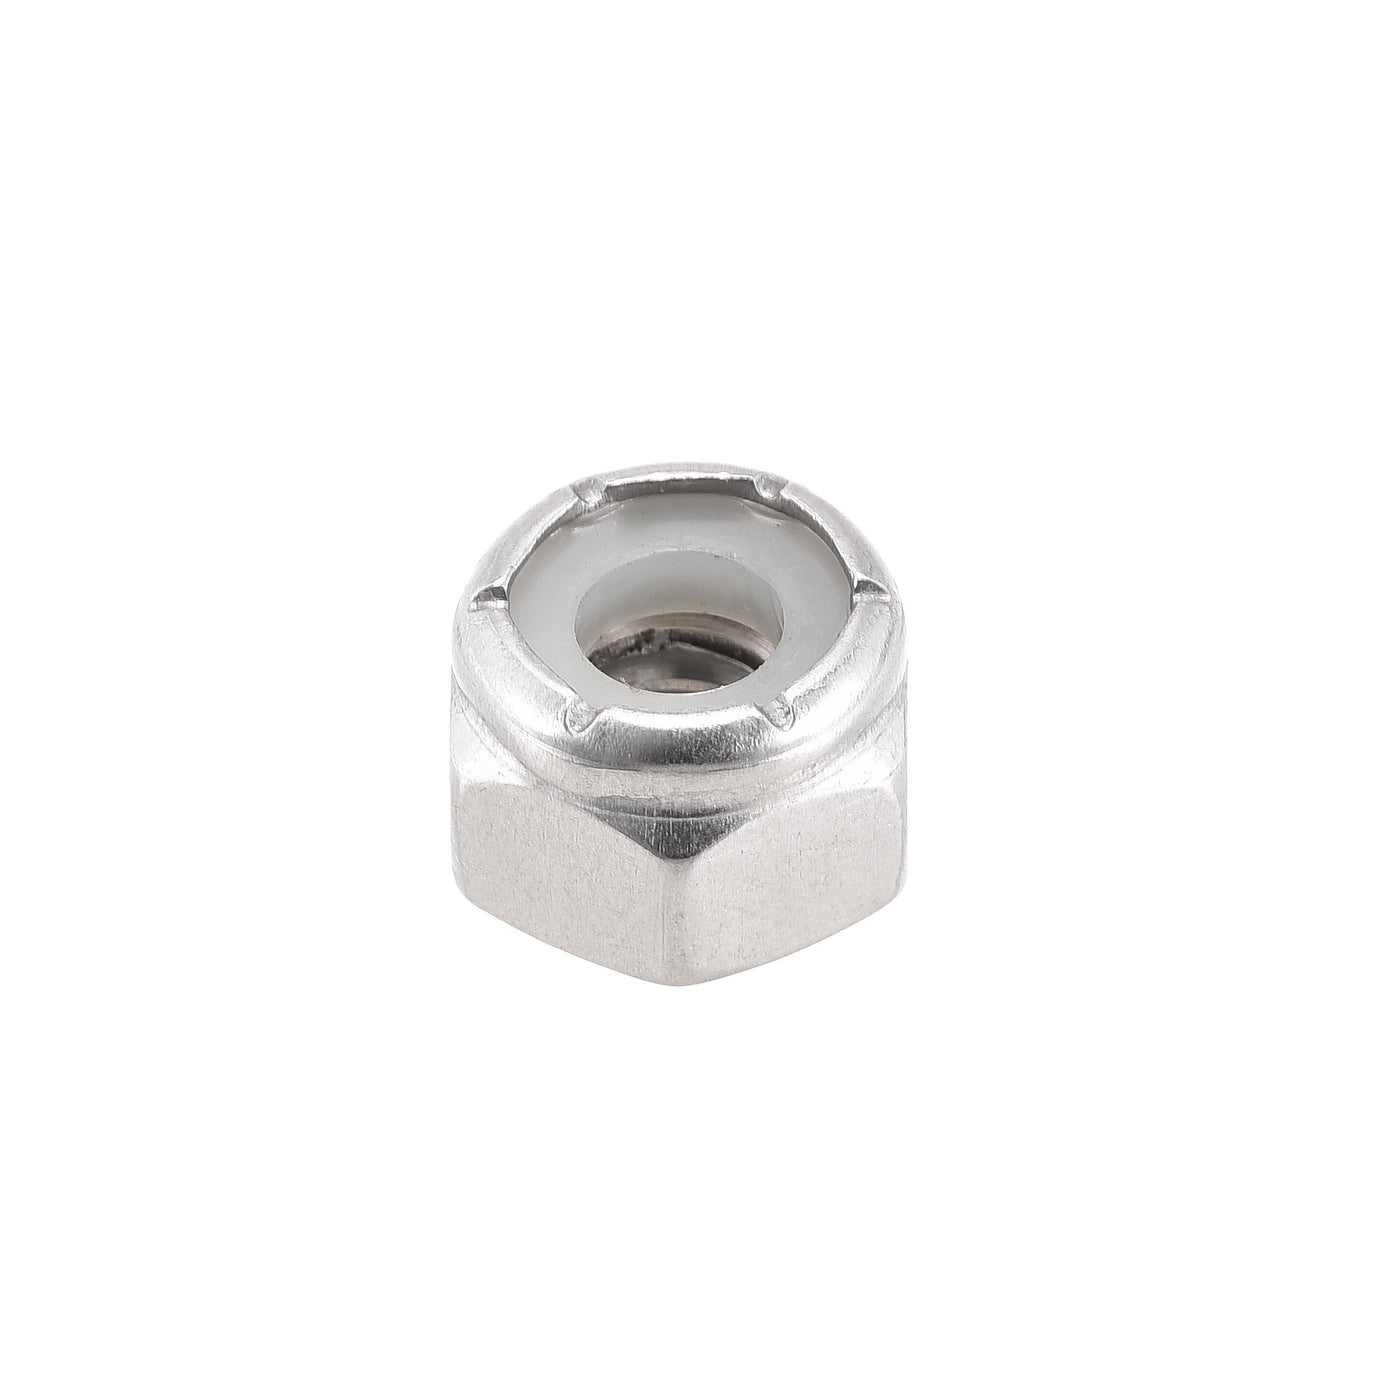 Uxcell Uxcell 1/4-20 UNC Nylon Insert Hex Lock Nuts, 304 Stainless Steel, Plain Finish, 25pcs